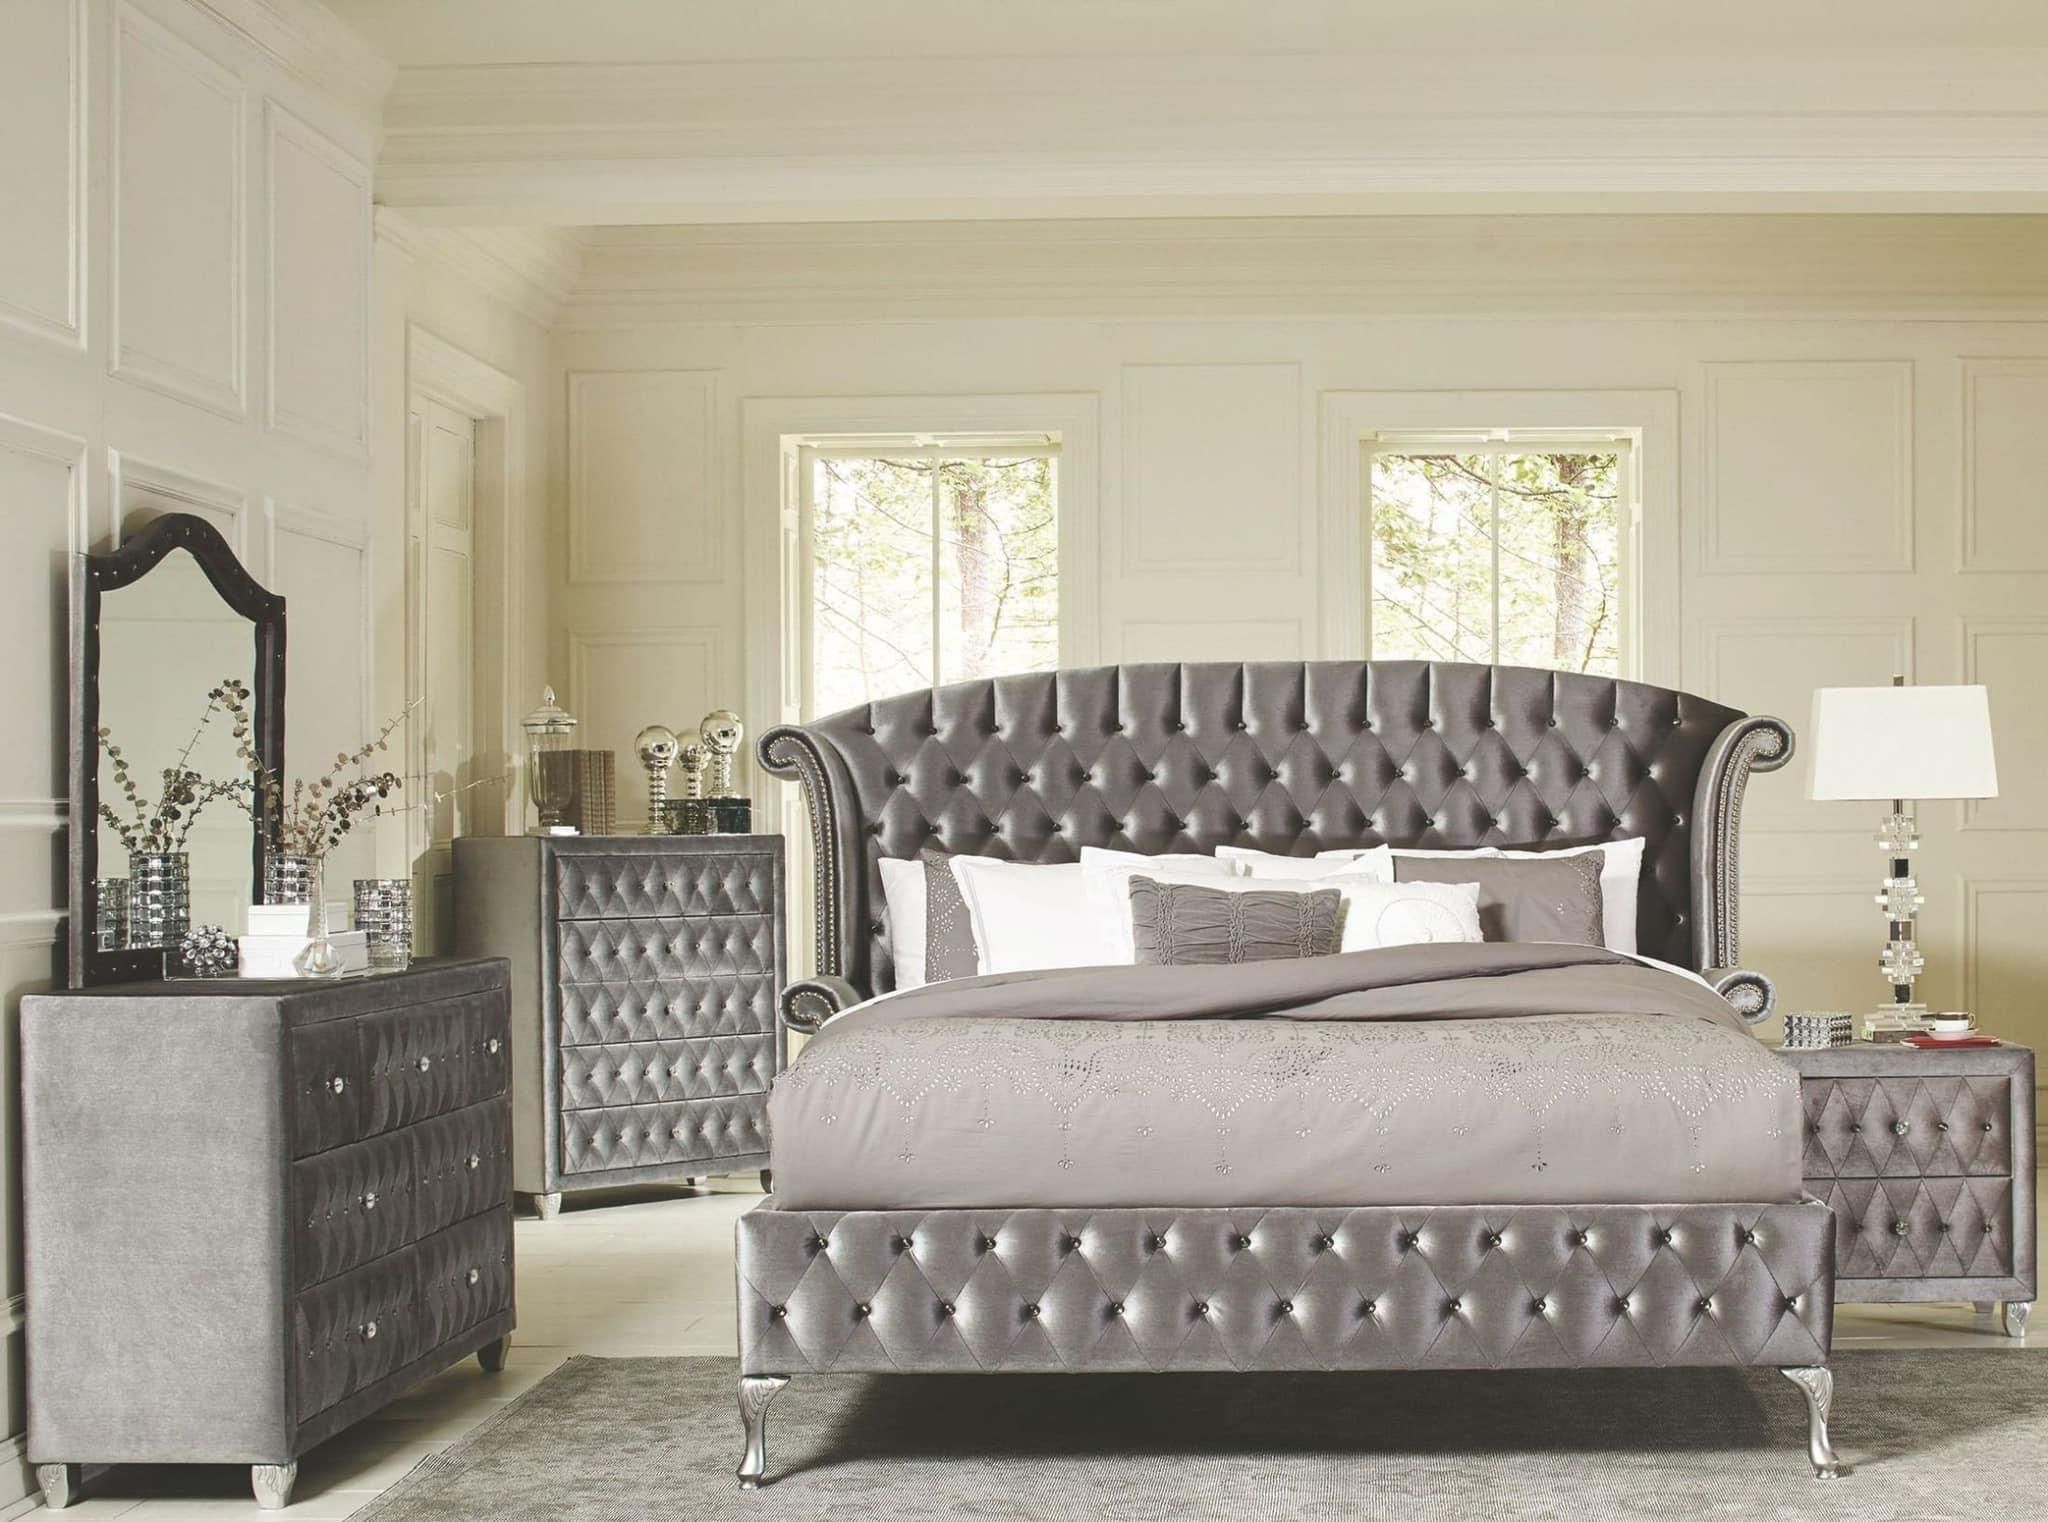 🚨King Deane Bedroom Group On Sale Now🚨